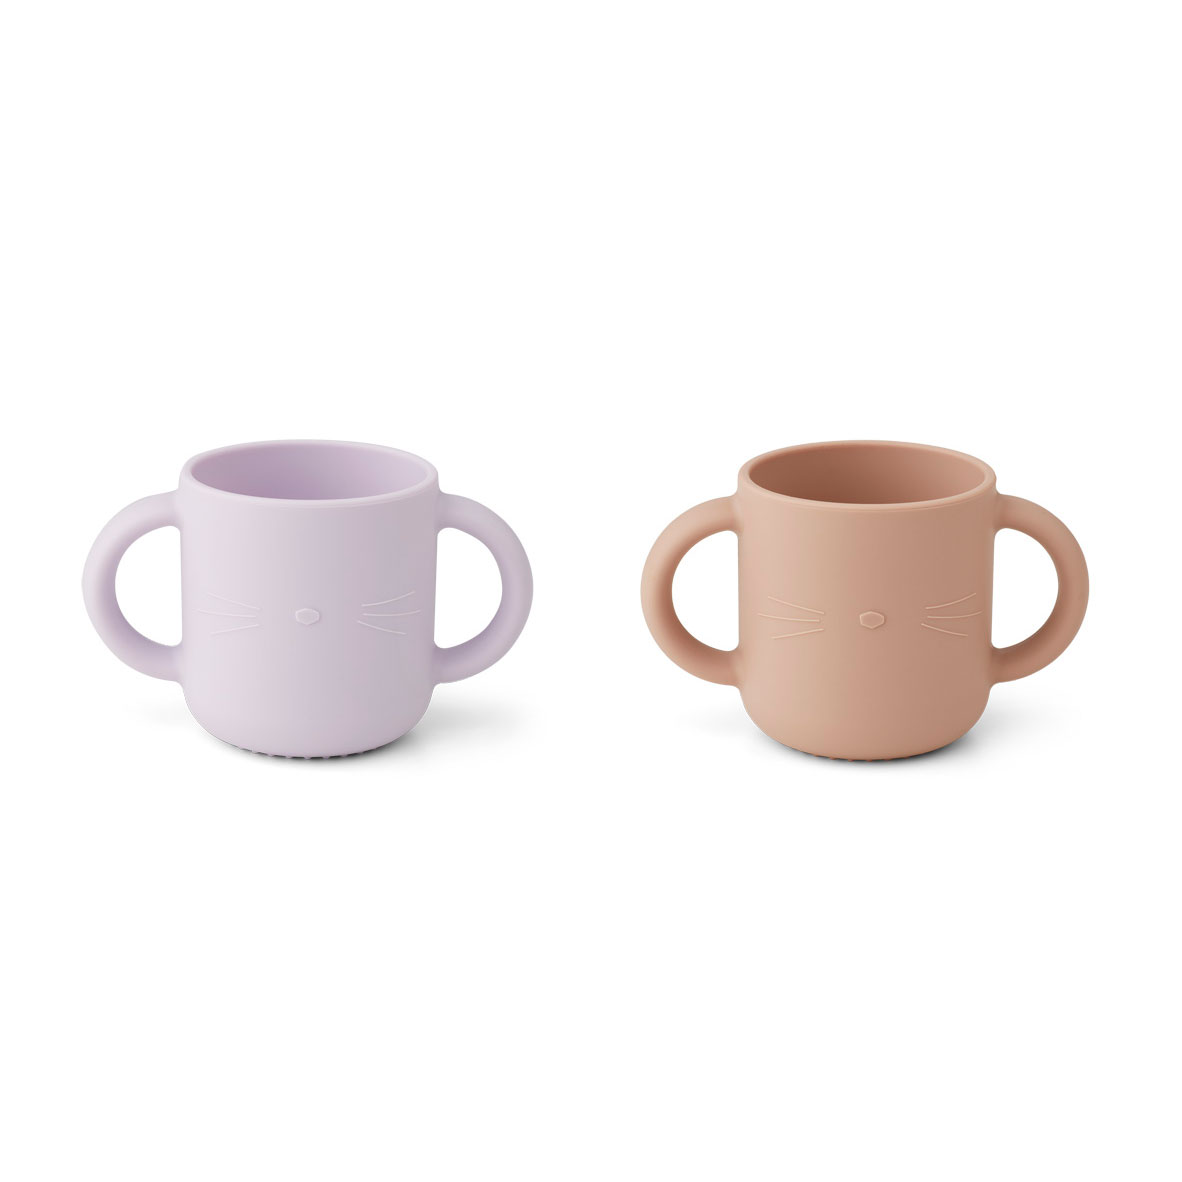 LIEWOO Gene Silicon Cups Light Lavender Rose